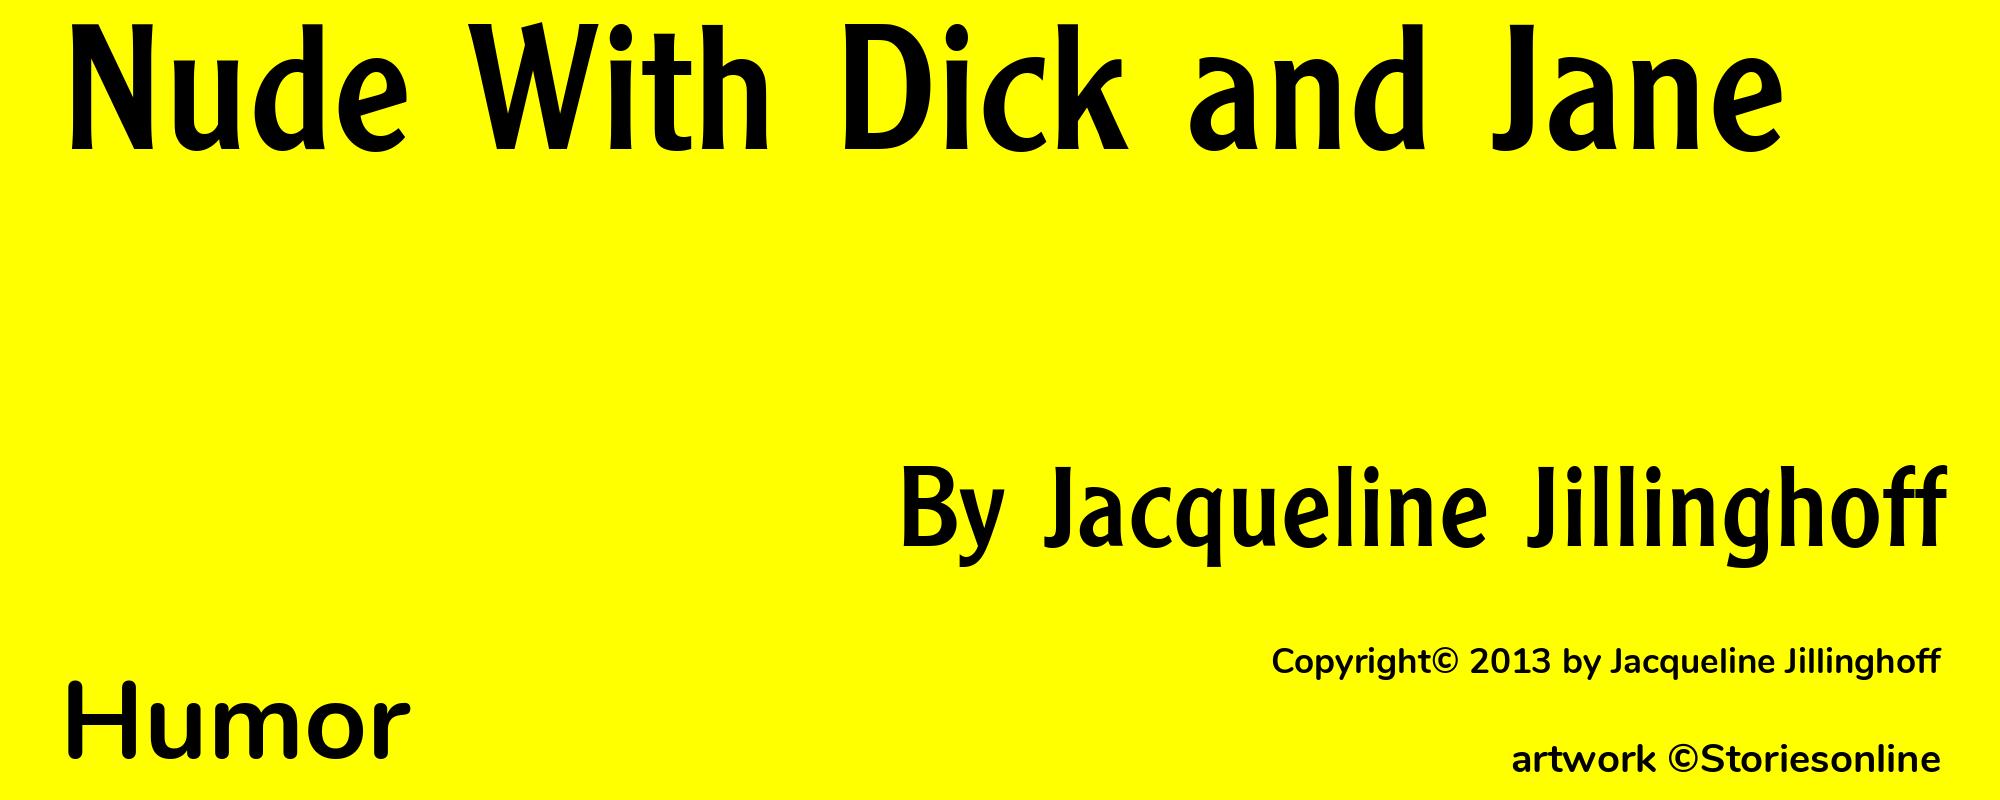 Nude With Dick and Jane - Cover